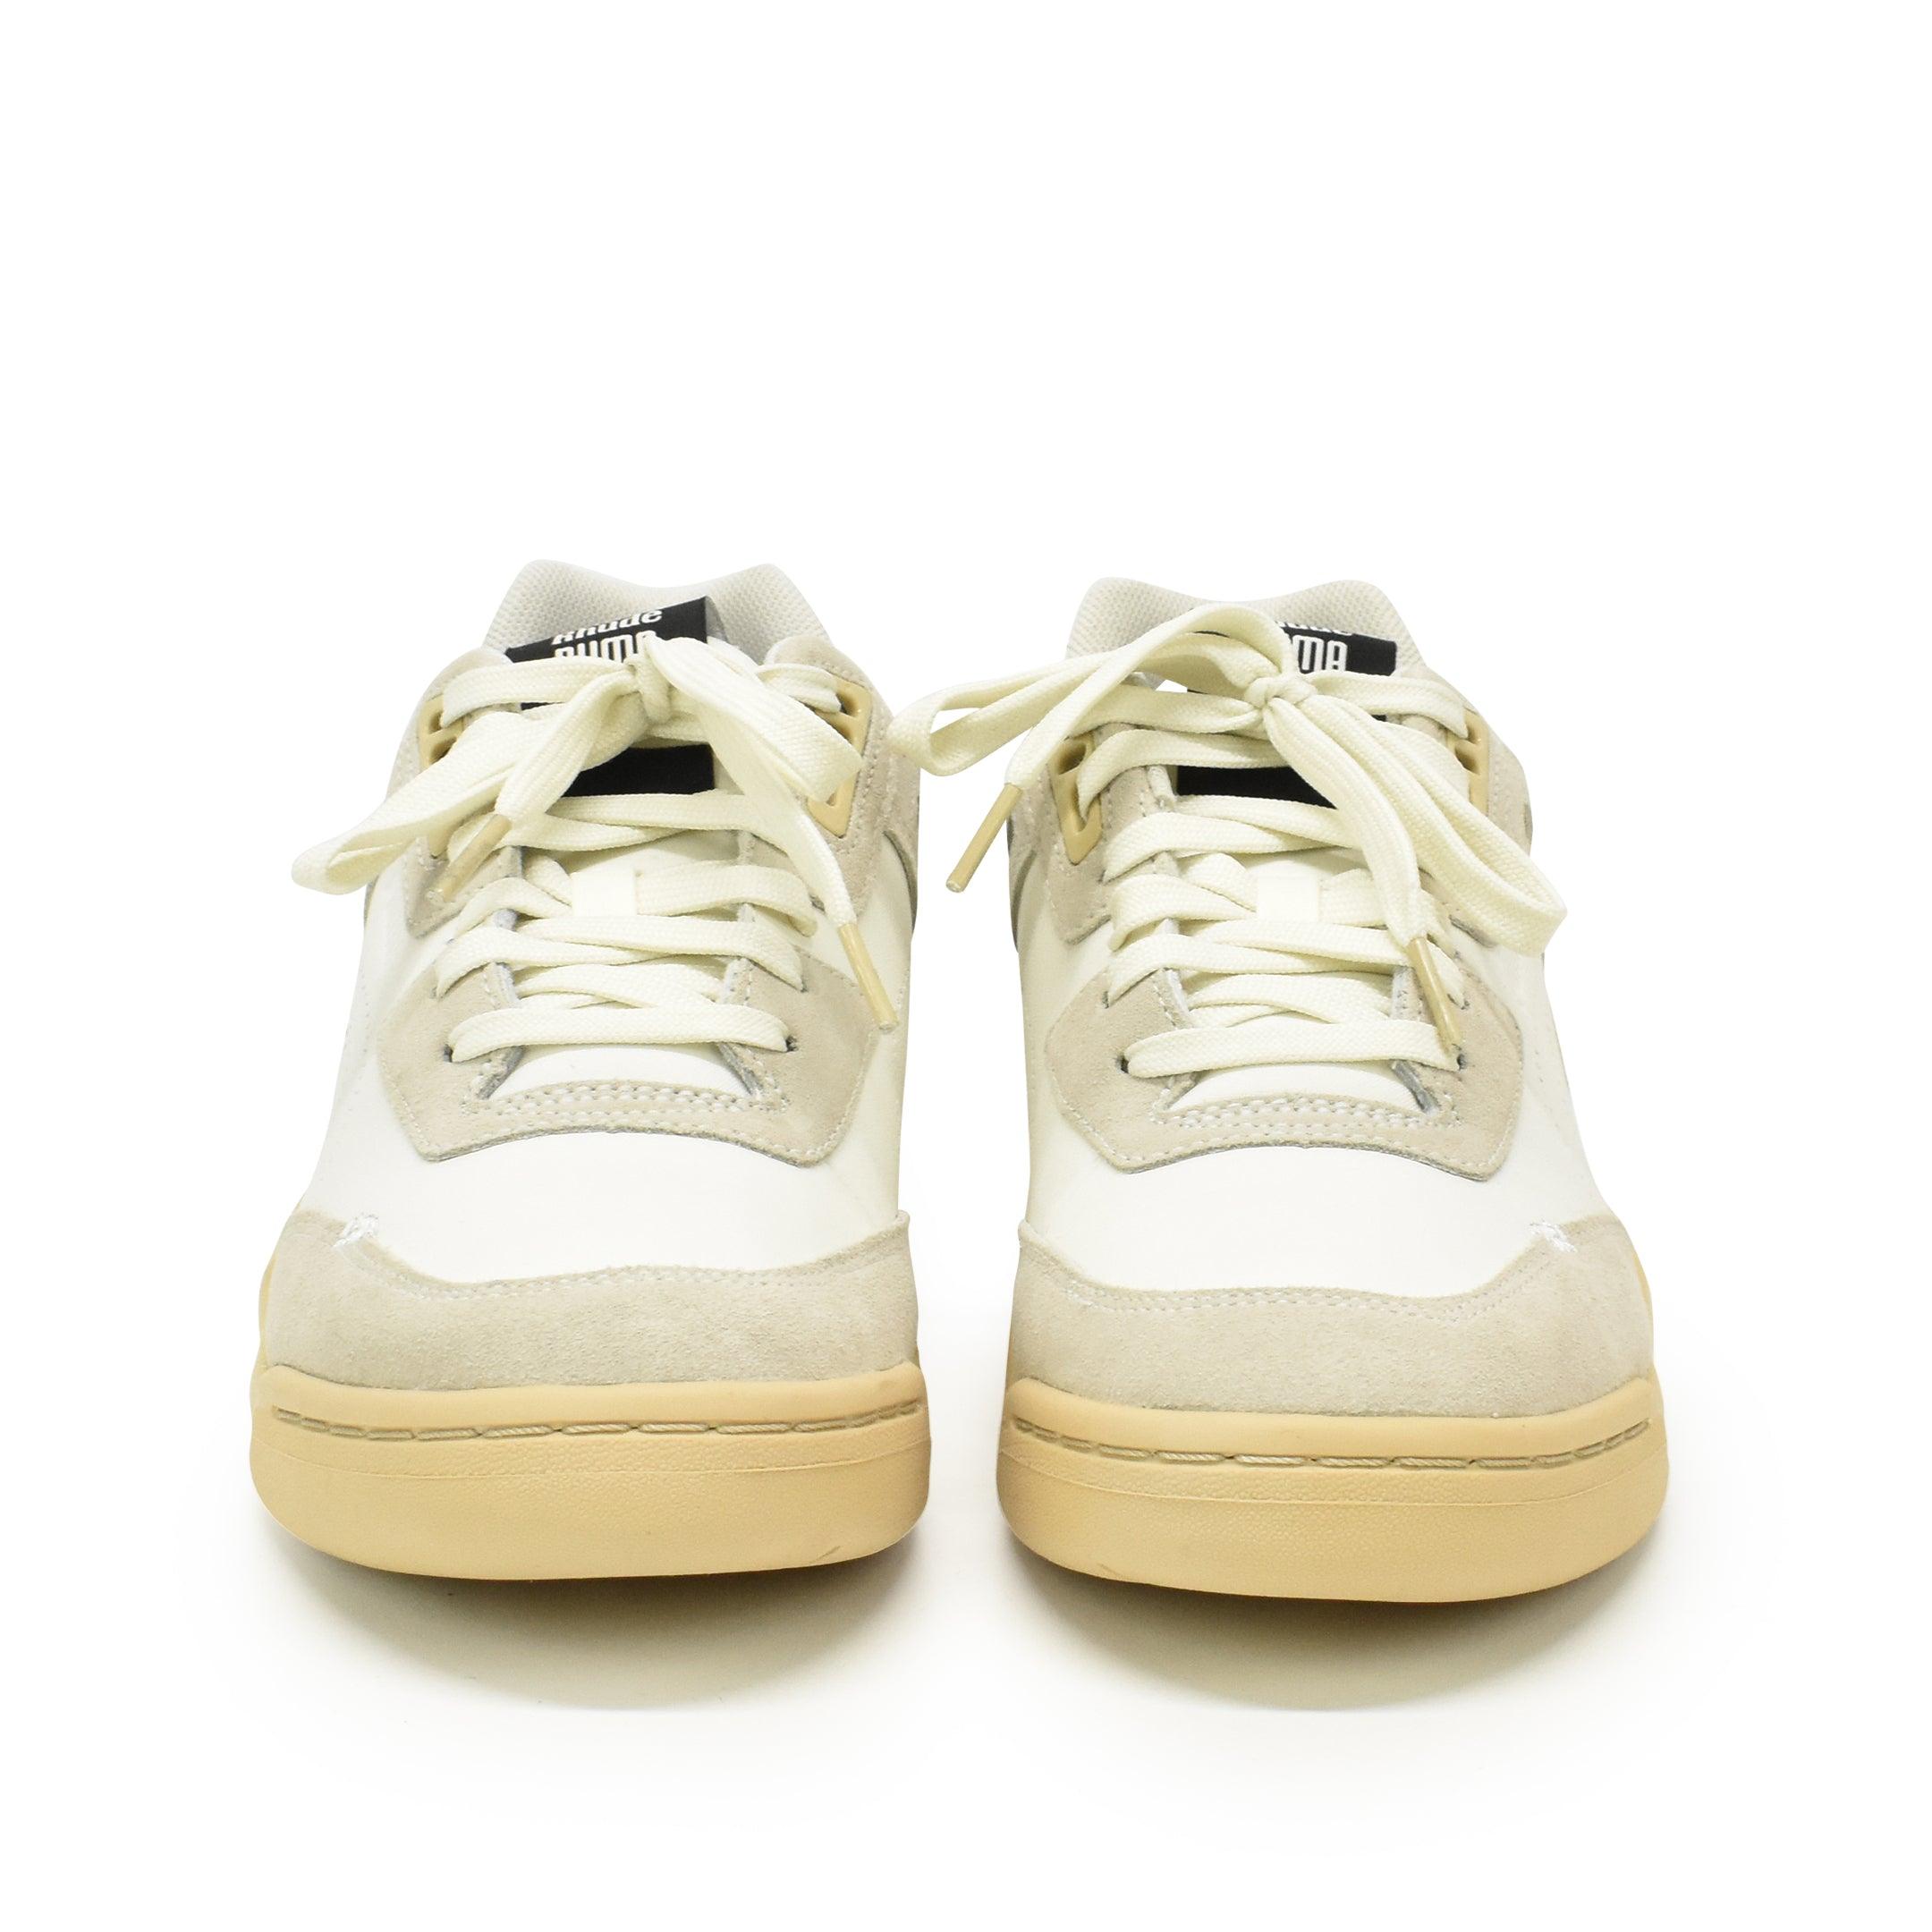 Puma x Rhude Sneakers - Men's 8 - Fashionably Yours